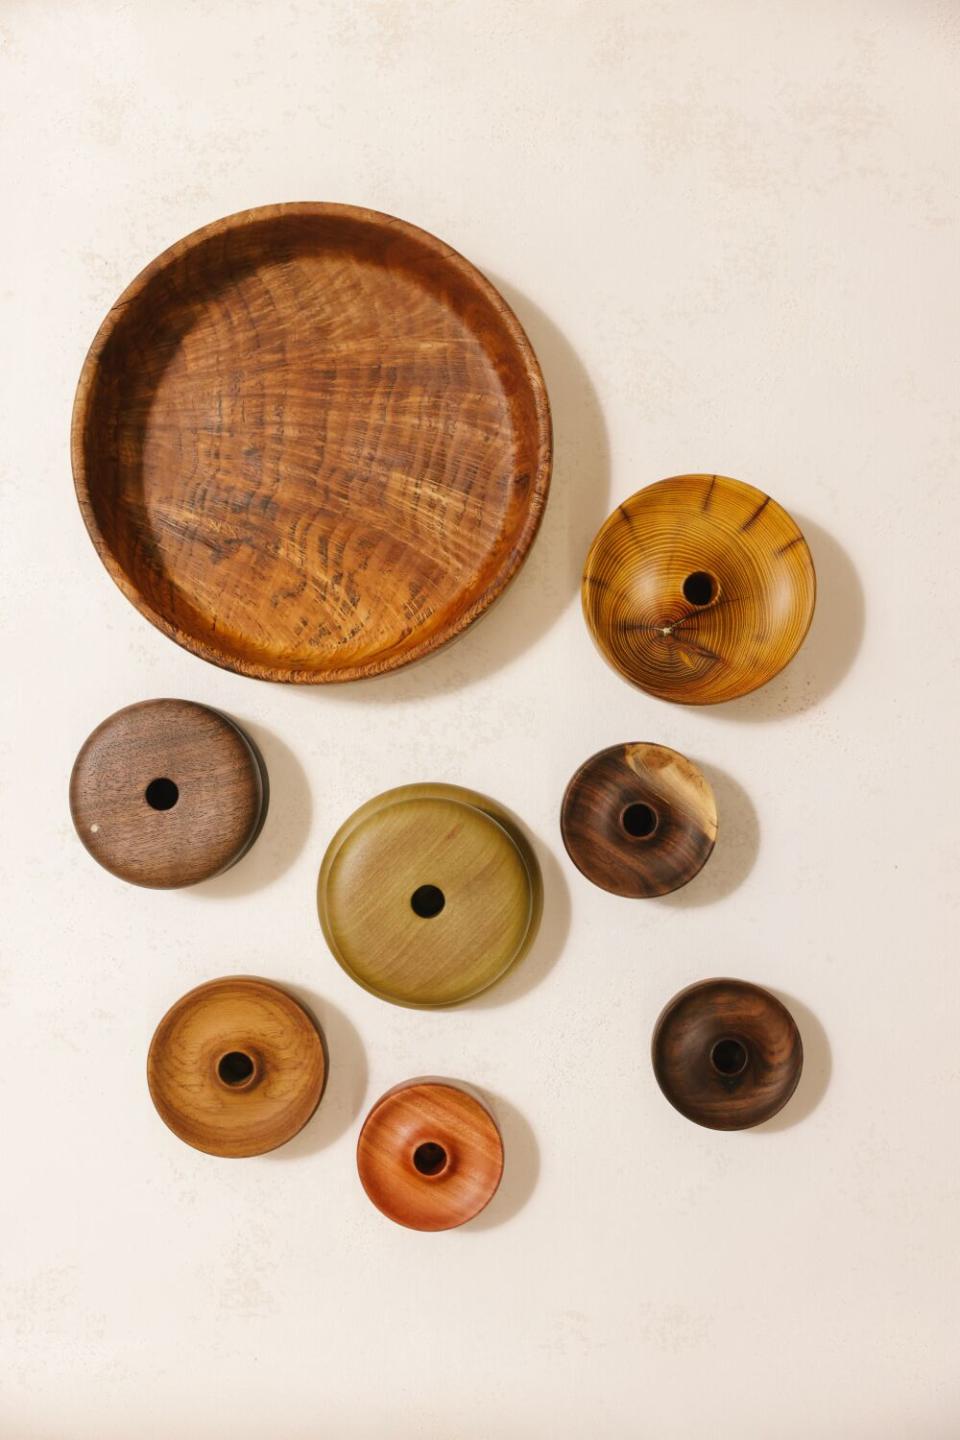 A wood bowl and vases